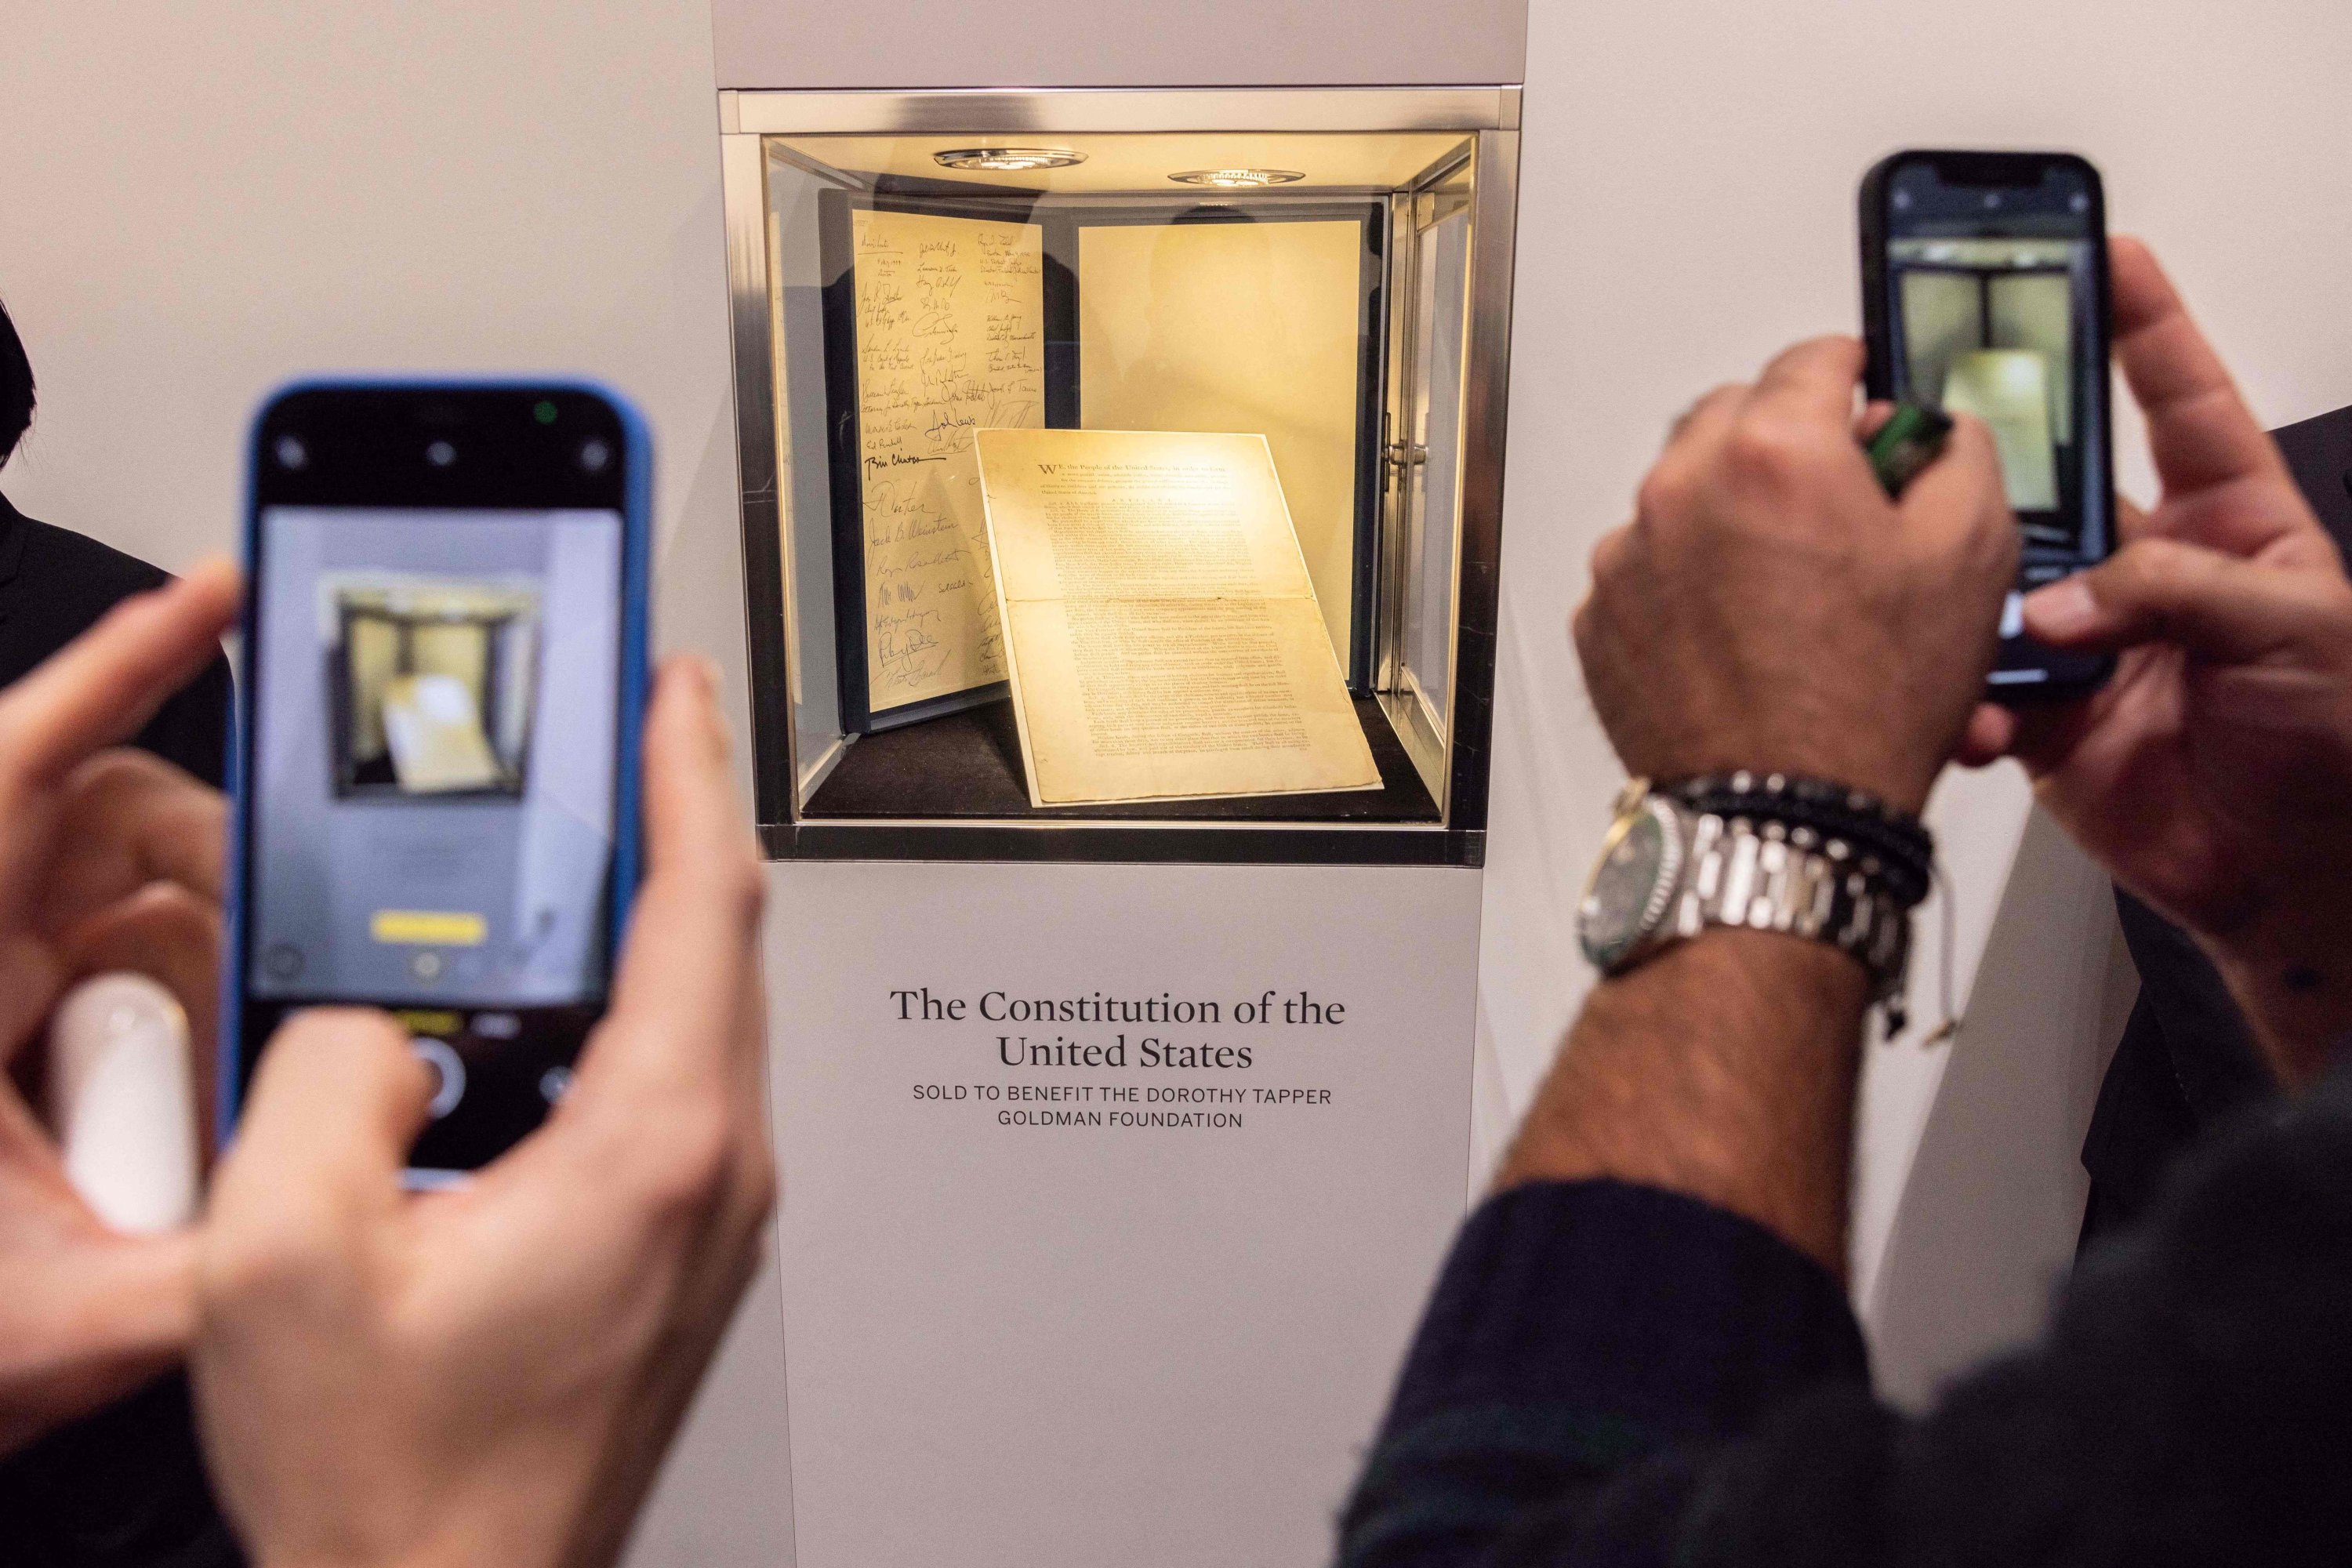 People take pictures of the first printing of the United States Constitution during an auction at Sotheby's auction house in New York, U.S., Nov. 18, 2021. (AFP Photo)